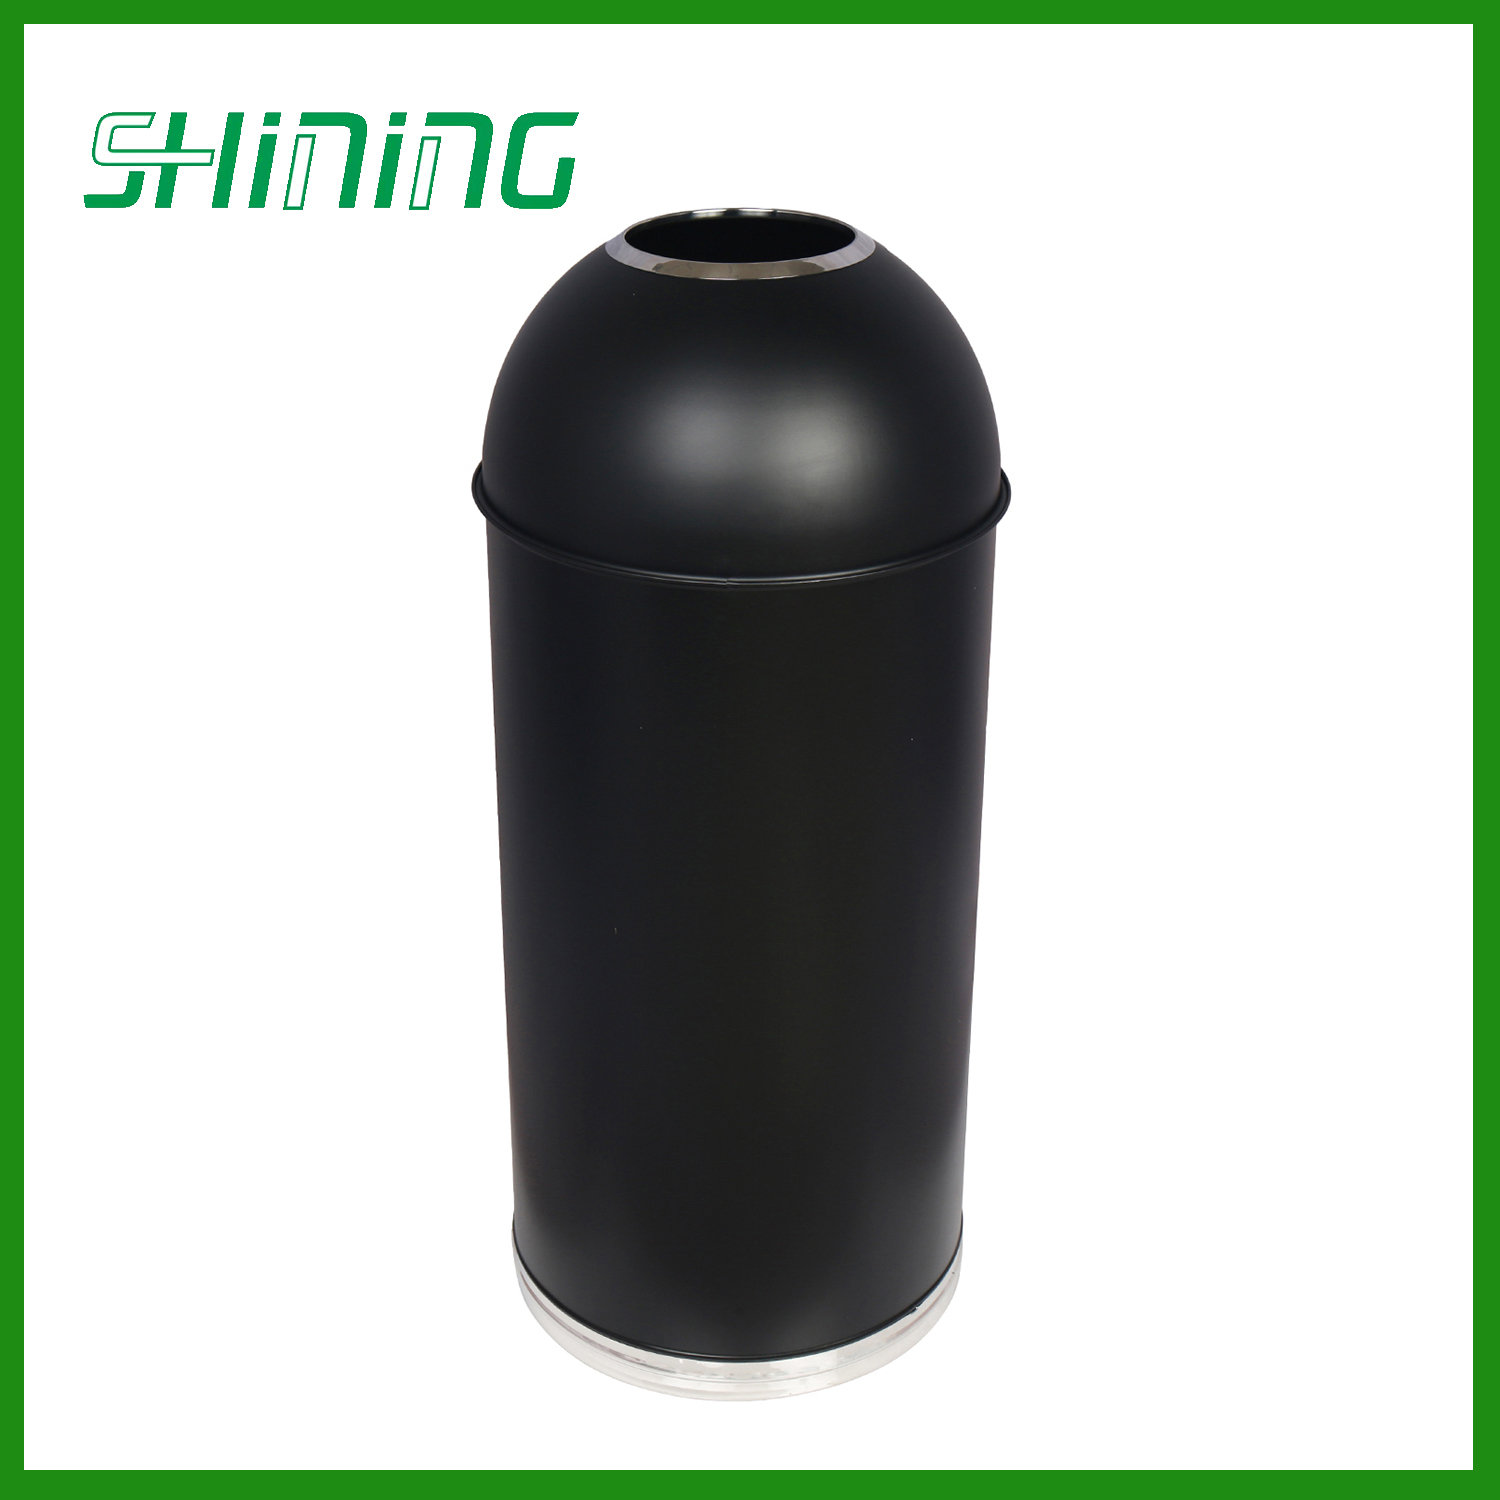 Rounded Metal Trash Can with Dome Top Recycling YH-158E